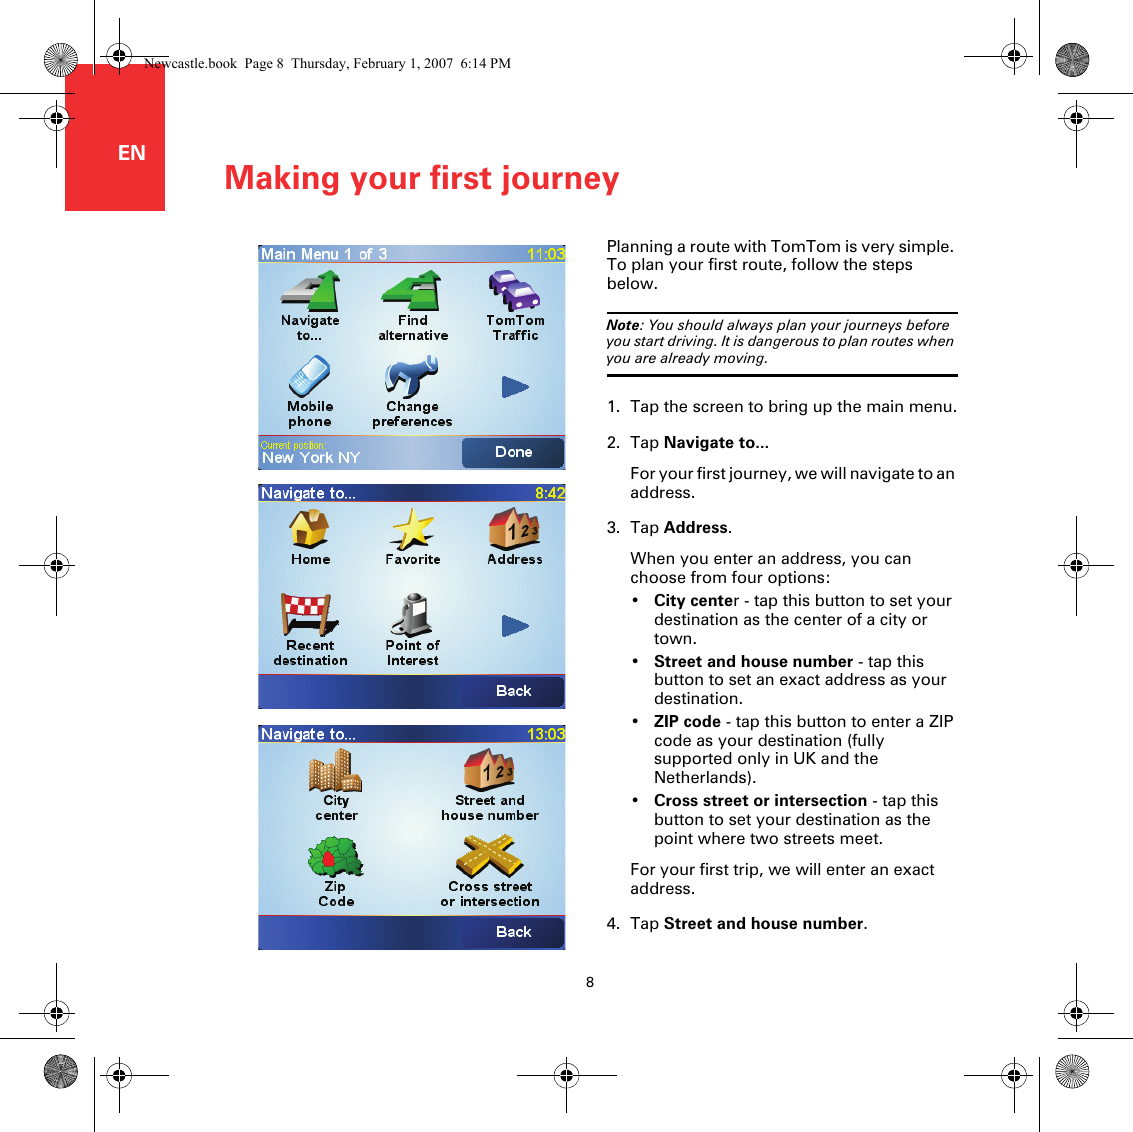 Making your first journey8ENMaking yo ur first journey Planning a route with TomTom is very simple. To plan your first route, follow the steps below.Note: You should always plan your journeys before you start driving. It is dangerous to plan routes when you are already moving.1. Tap the screen to bring up the main menu.2. Tap Navigate to...For your first journey, we will navigate to an address.3. Tap Address.When you enter an address, you can choose from four options:•City center - tap this button to set your destination as the center of a city or town.•Street and house number - tap this button to set an exact address as your destination.•ZIP code - tap this button to enter a ZIP code as your destination (fully supported only in UK and the Netherlands).•Cross street or intersection - tap this button to set your destination as the point where two streets meet.For your first trip, we will enter an exact address.4. Tap Street and house number.Newcastle.book  Page 8  Thursday, February 1, 2007  6:14 PM